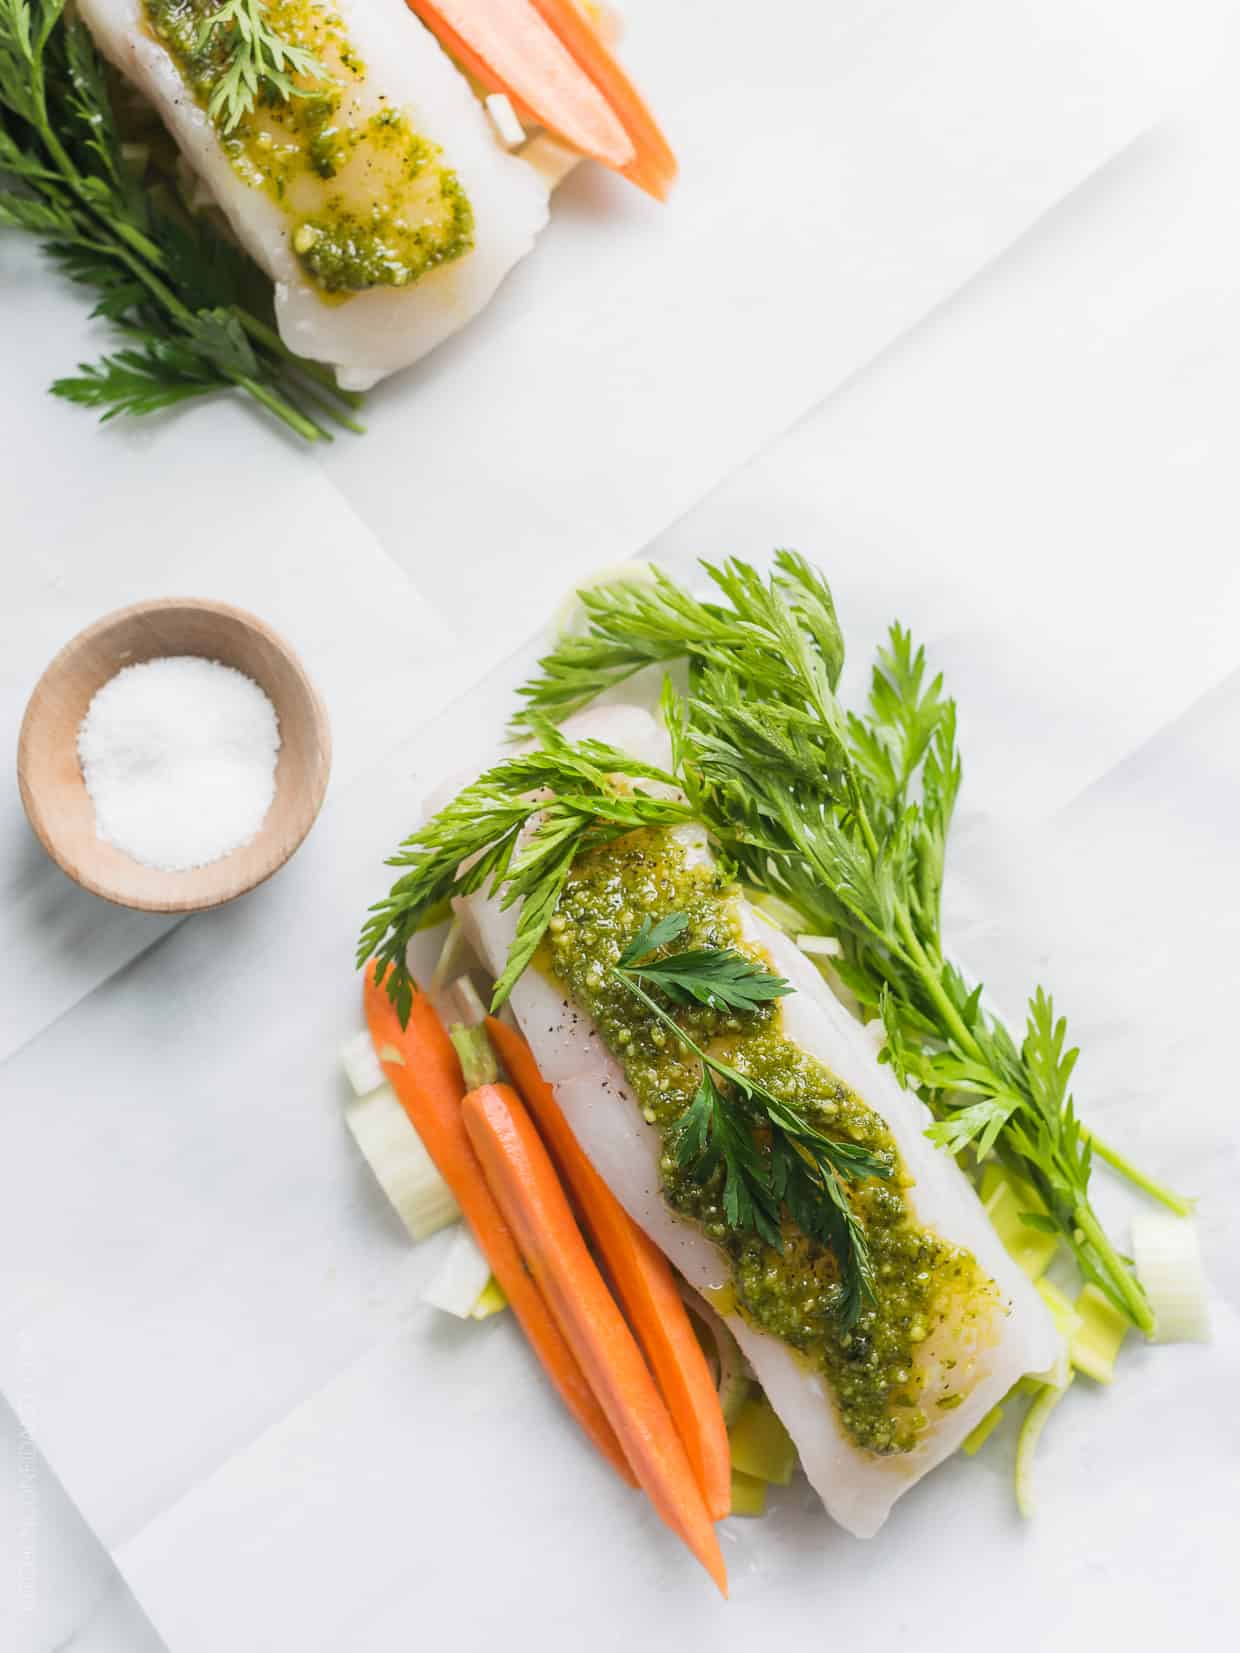 Baked halibut in parchment paper with carrot top pesto on top.